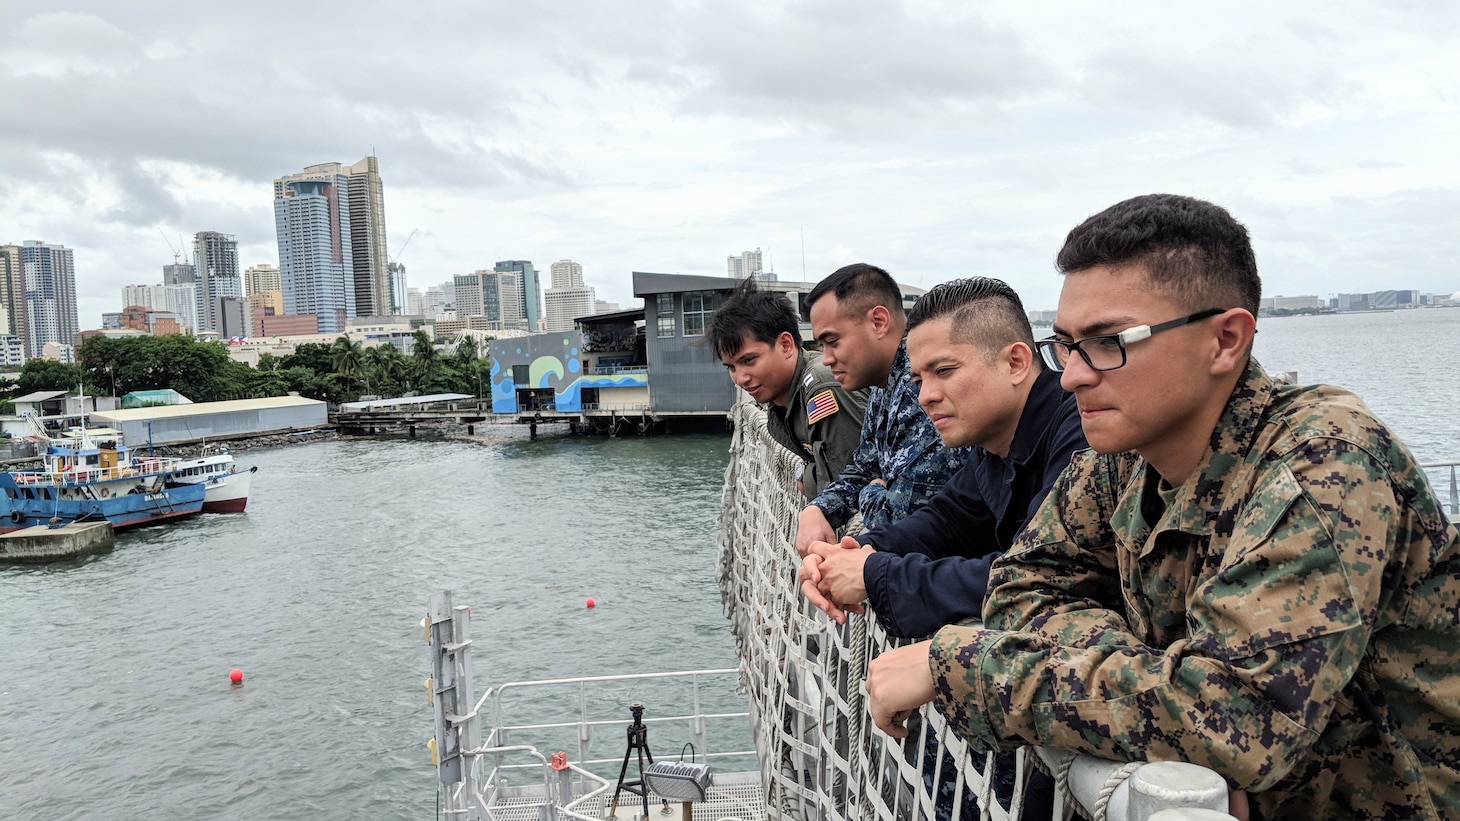 MANILA, Republic of the Philippines (June 11, 2018), Lance Cpl. Erwin Matias, Lt. Ivin Dysangco, Chief Religious Programs Specialist Nino Miranda, Information Systems Technician 1st Class Reiner Ramos, Hospital Corpsman 1st Class Ed Ibay, all from the Republic of the Philippines, pose for a group photo as USNS Millinocket (T-EPF 3) pulls into the port of Manila. More than 40 members of the U.S. 7th Fleet staff are currently embarked on Millinocket, visiting several countries in the Indo-Pacific in support of a theater security cooperation patrol.